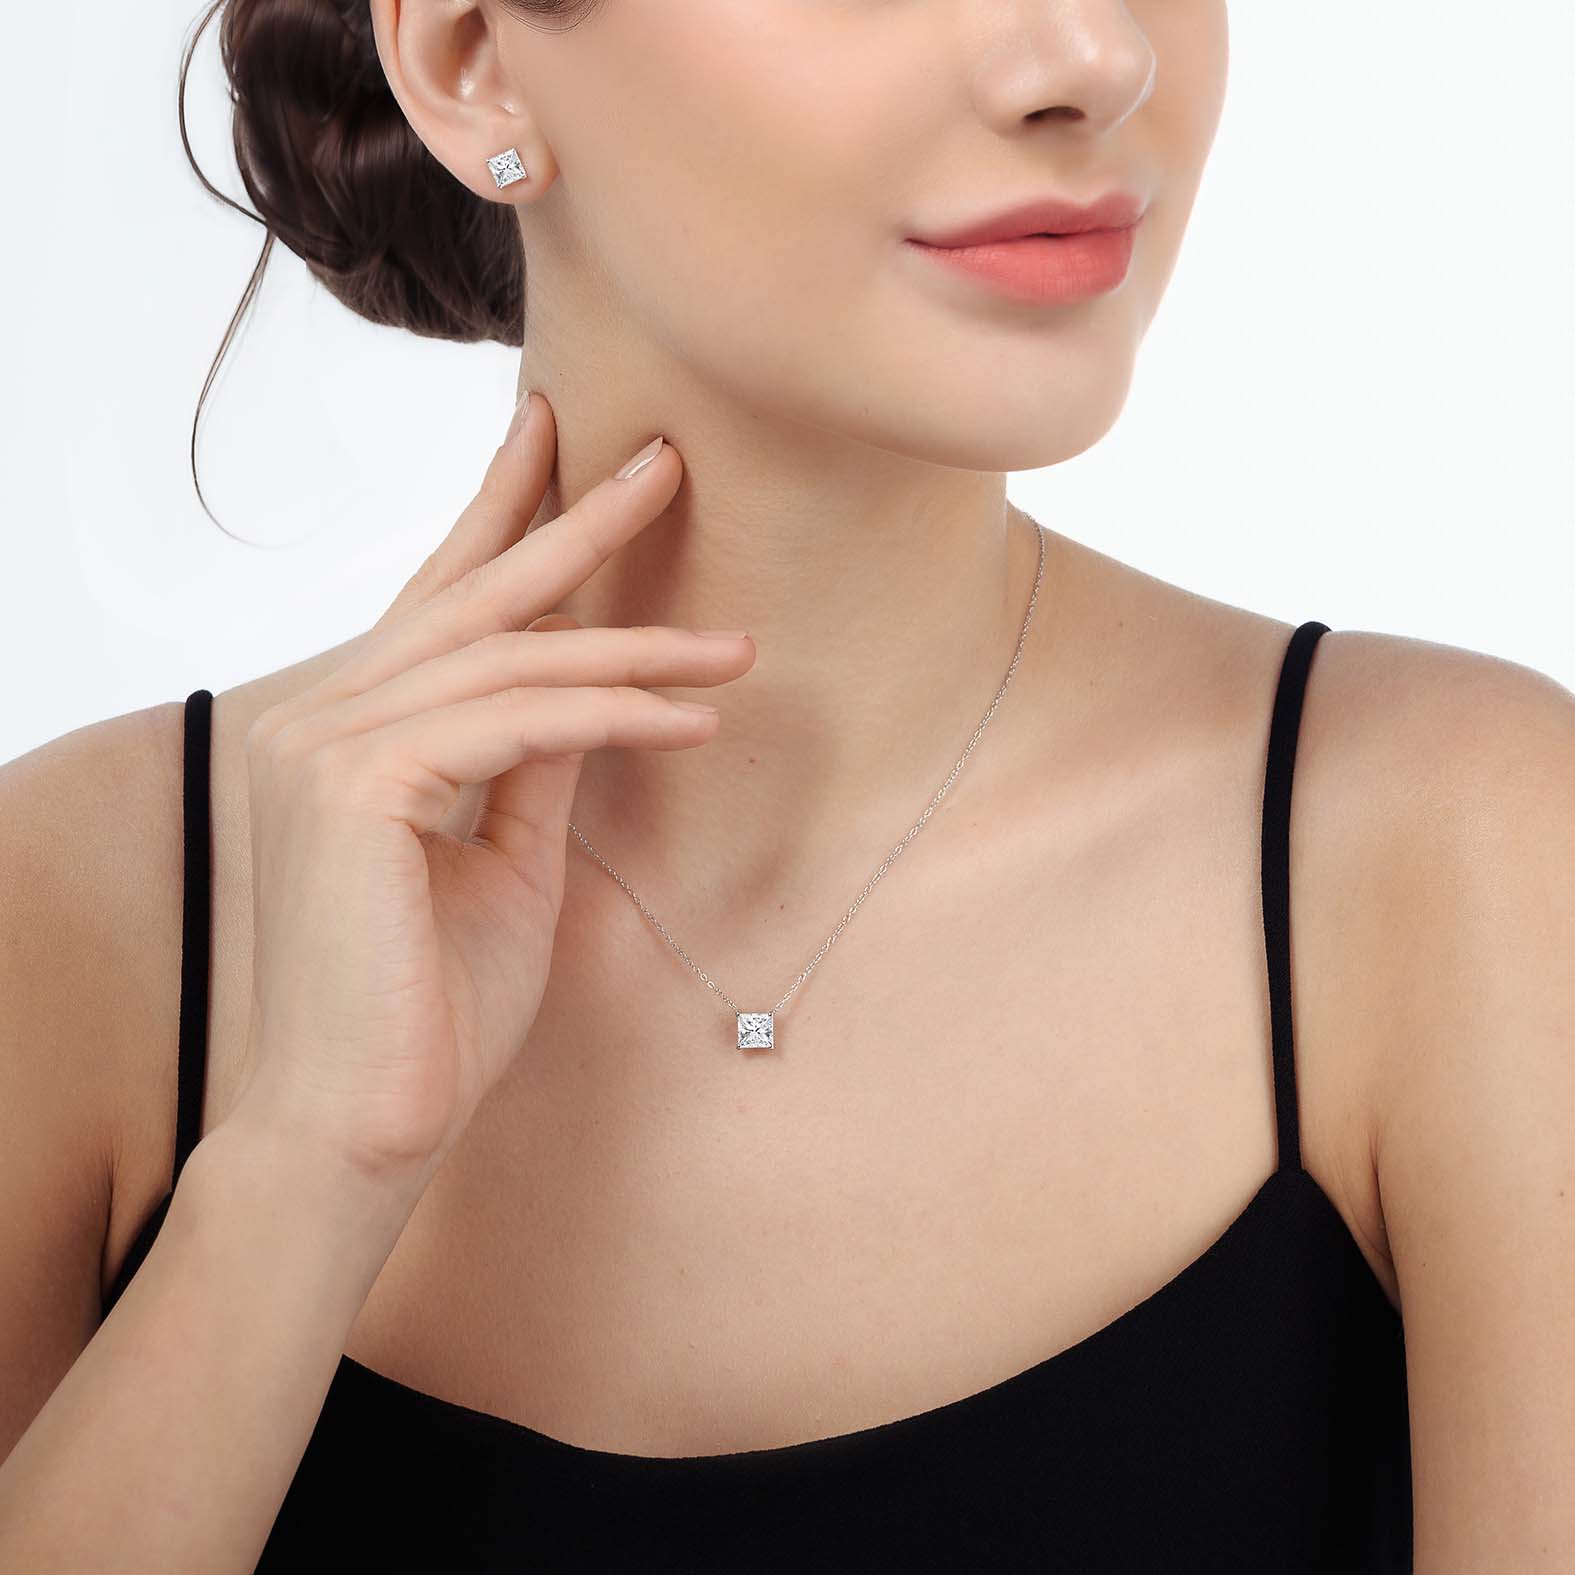 Tia Princess Solitaire Ear Studs 1CT (Model) - Eclat by Oui